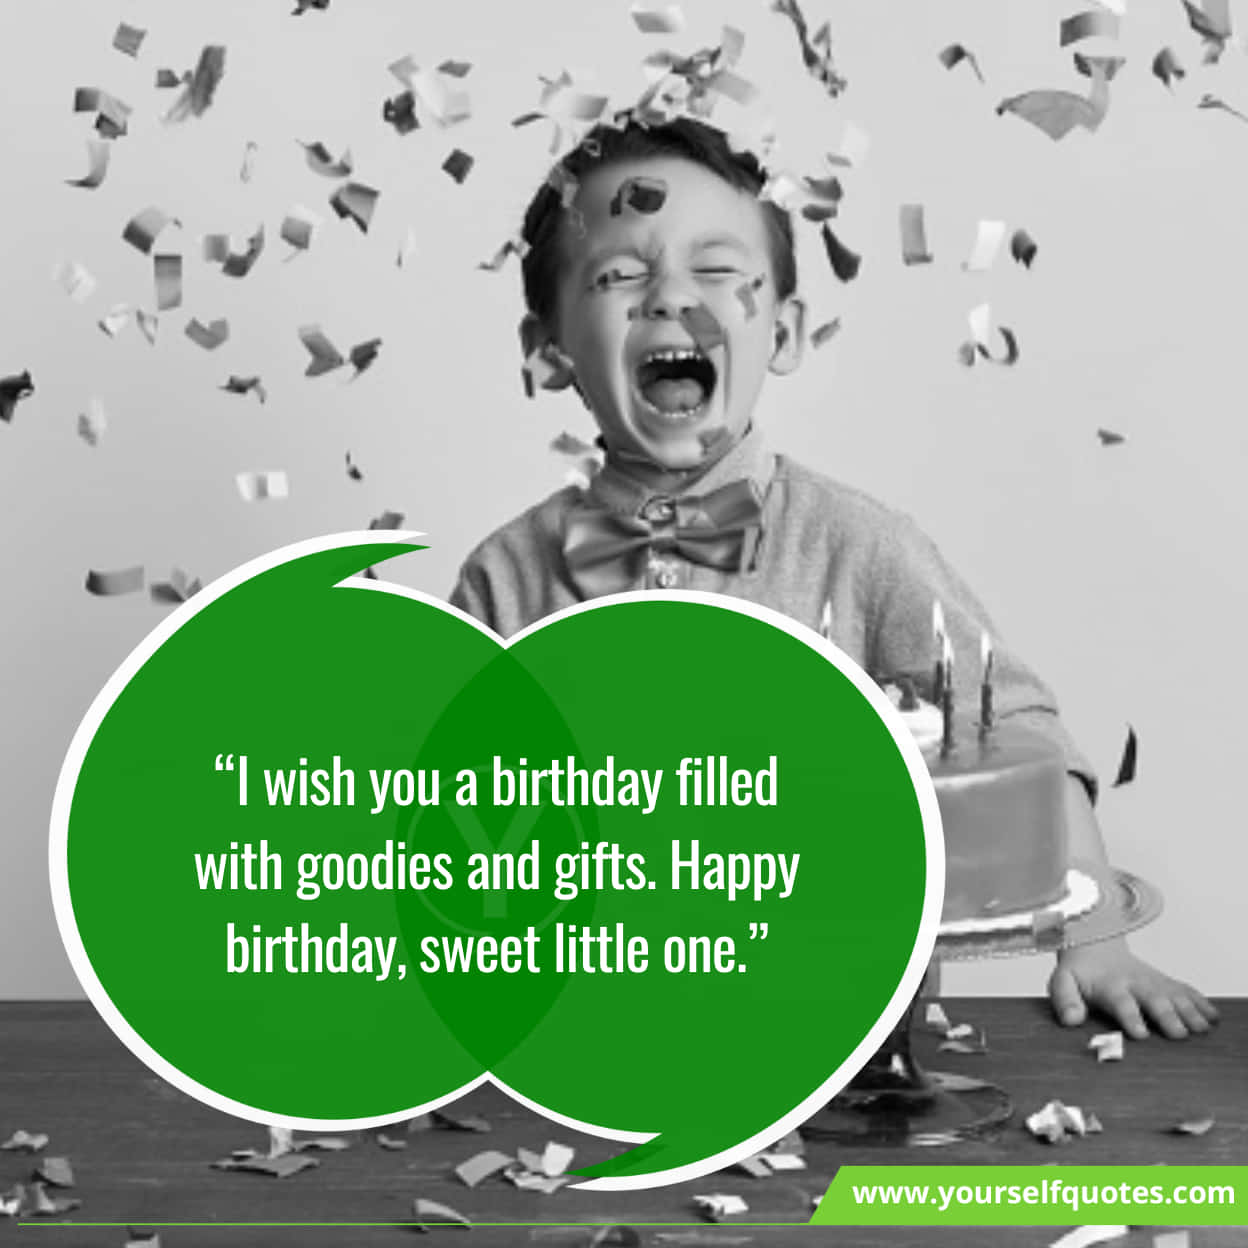 Happy Birthday Wishes For Kids To Make Them Feel Joyous